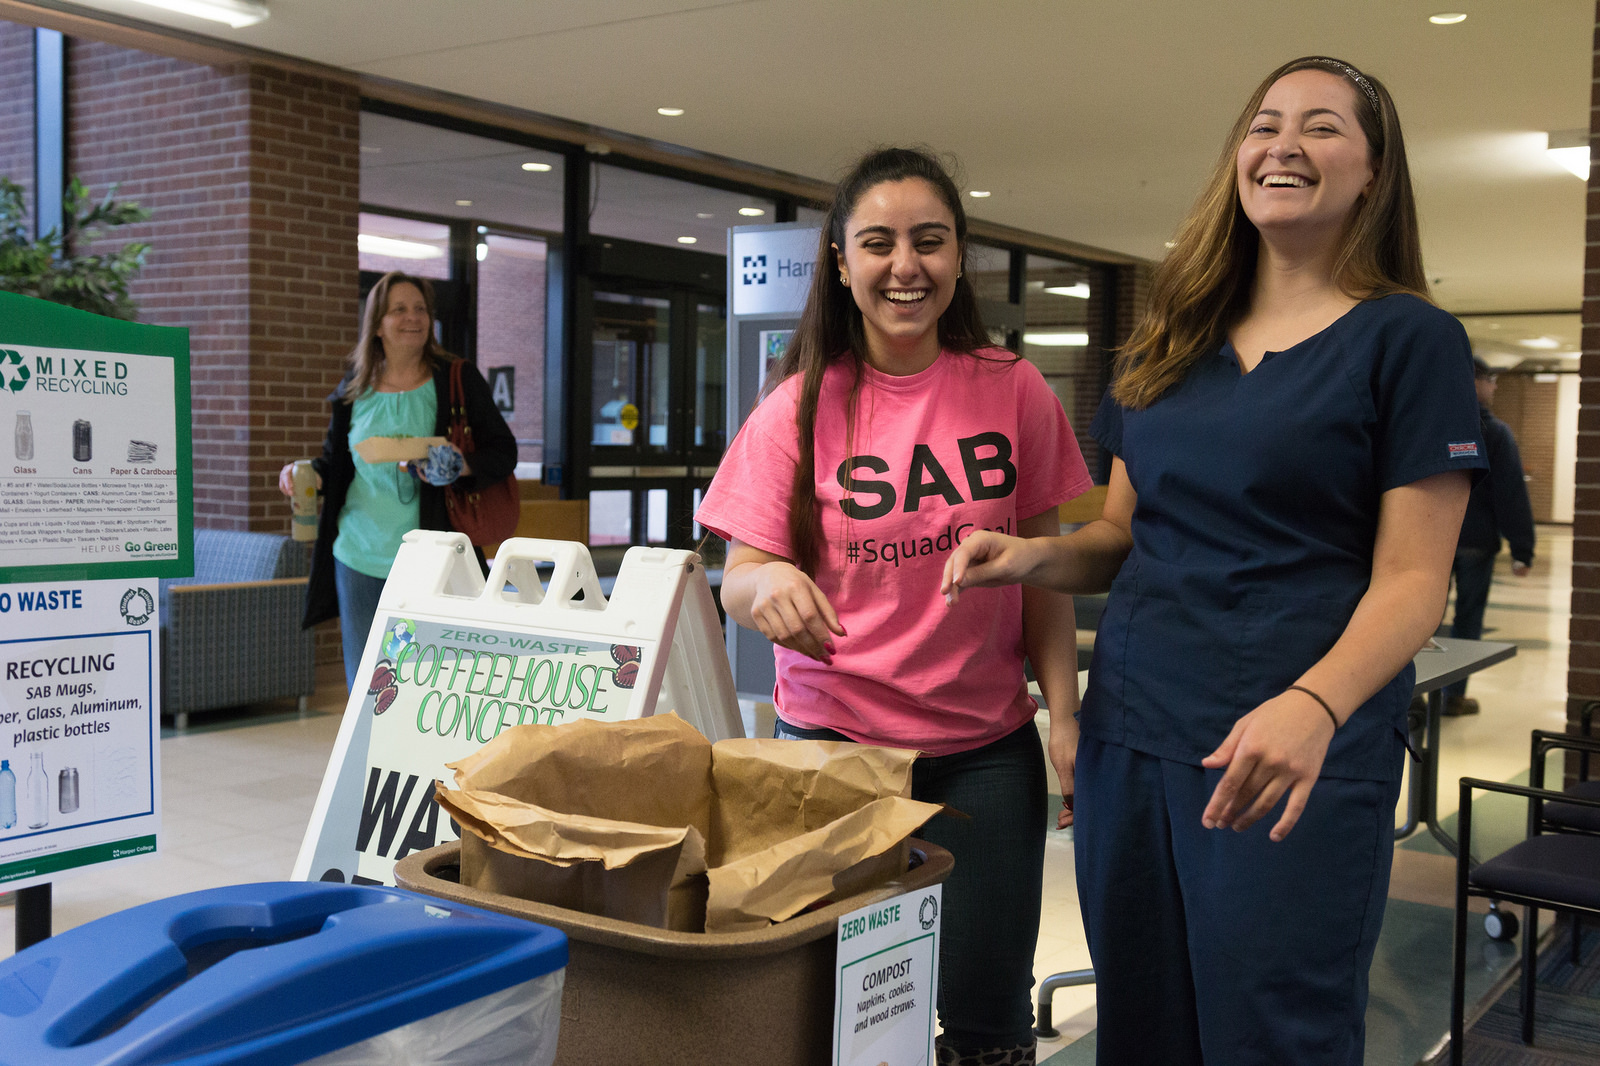 Students participate in a zero waste event on campus.